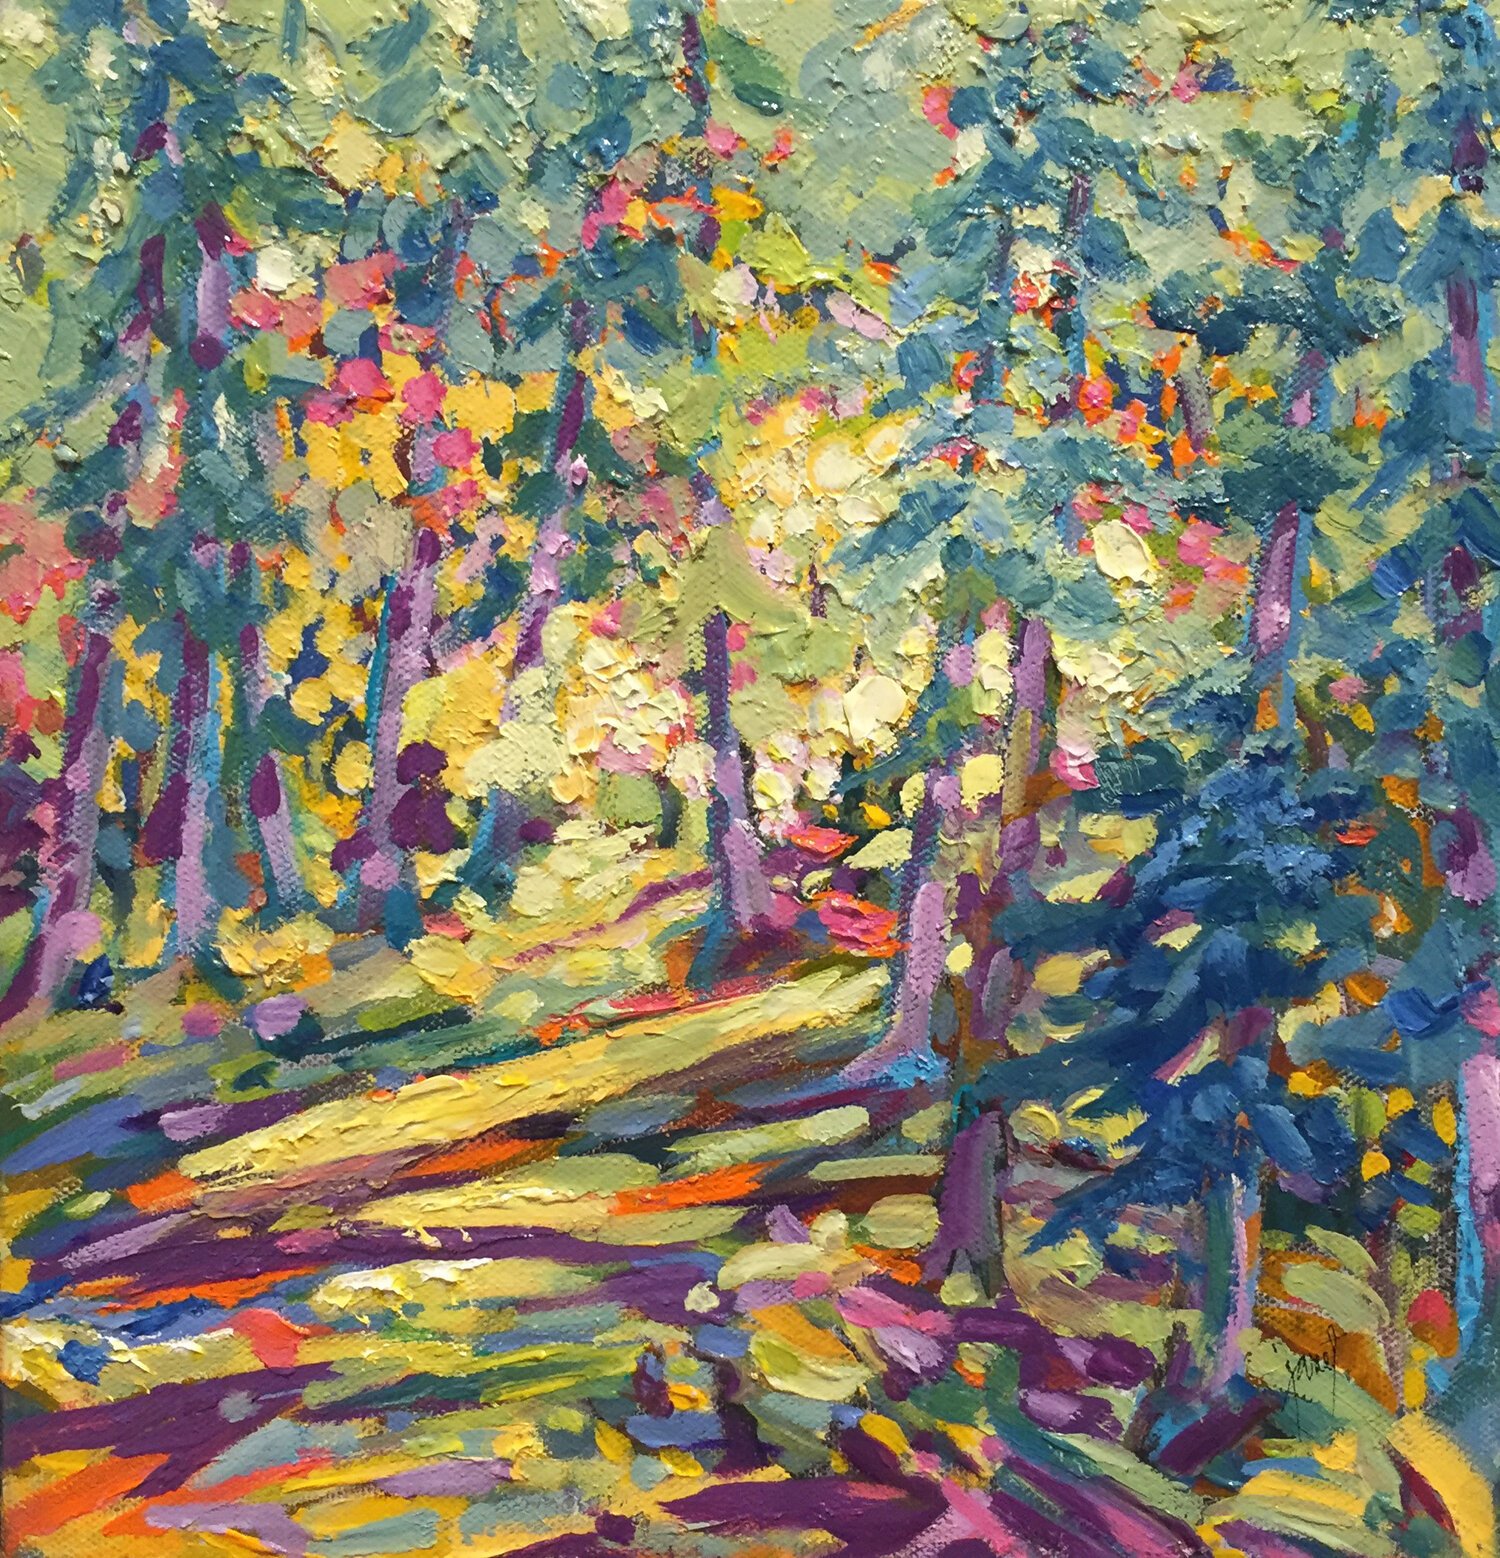   SOLD    Ten Trees ll   Oil on canvas  11” x11”  